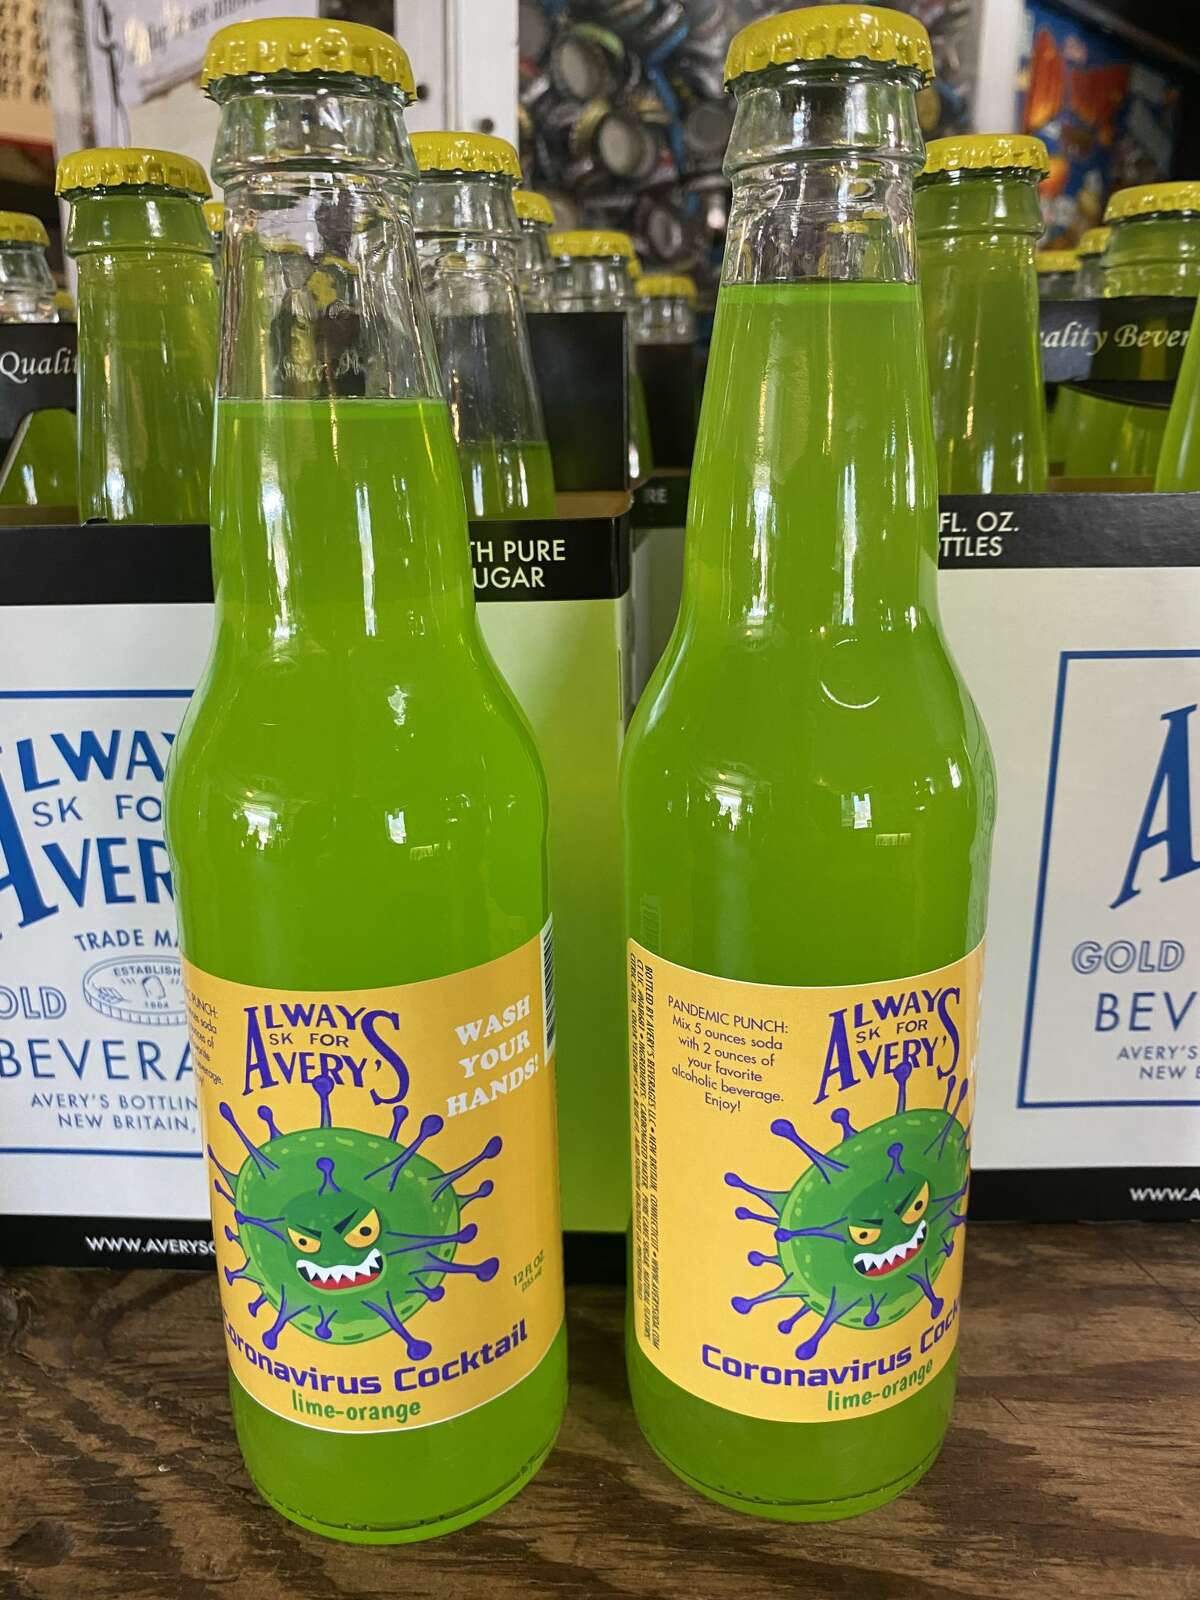 Avery Soda in New Britain, Conn. launched their new temporary flavor called "Coronavirus Cocktail" on March 8, 2020.